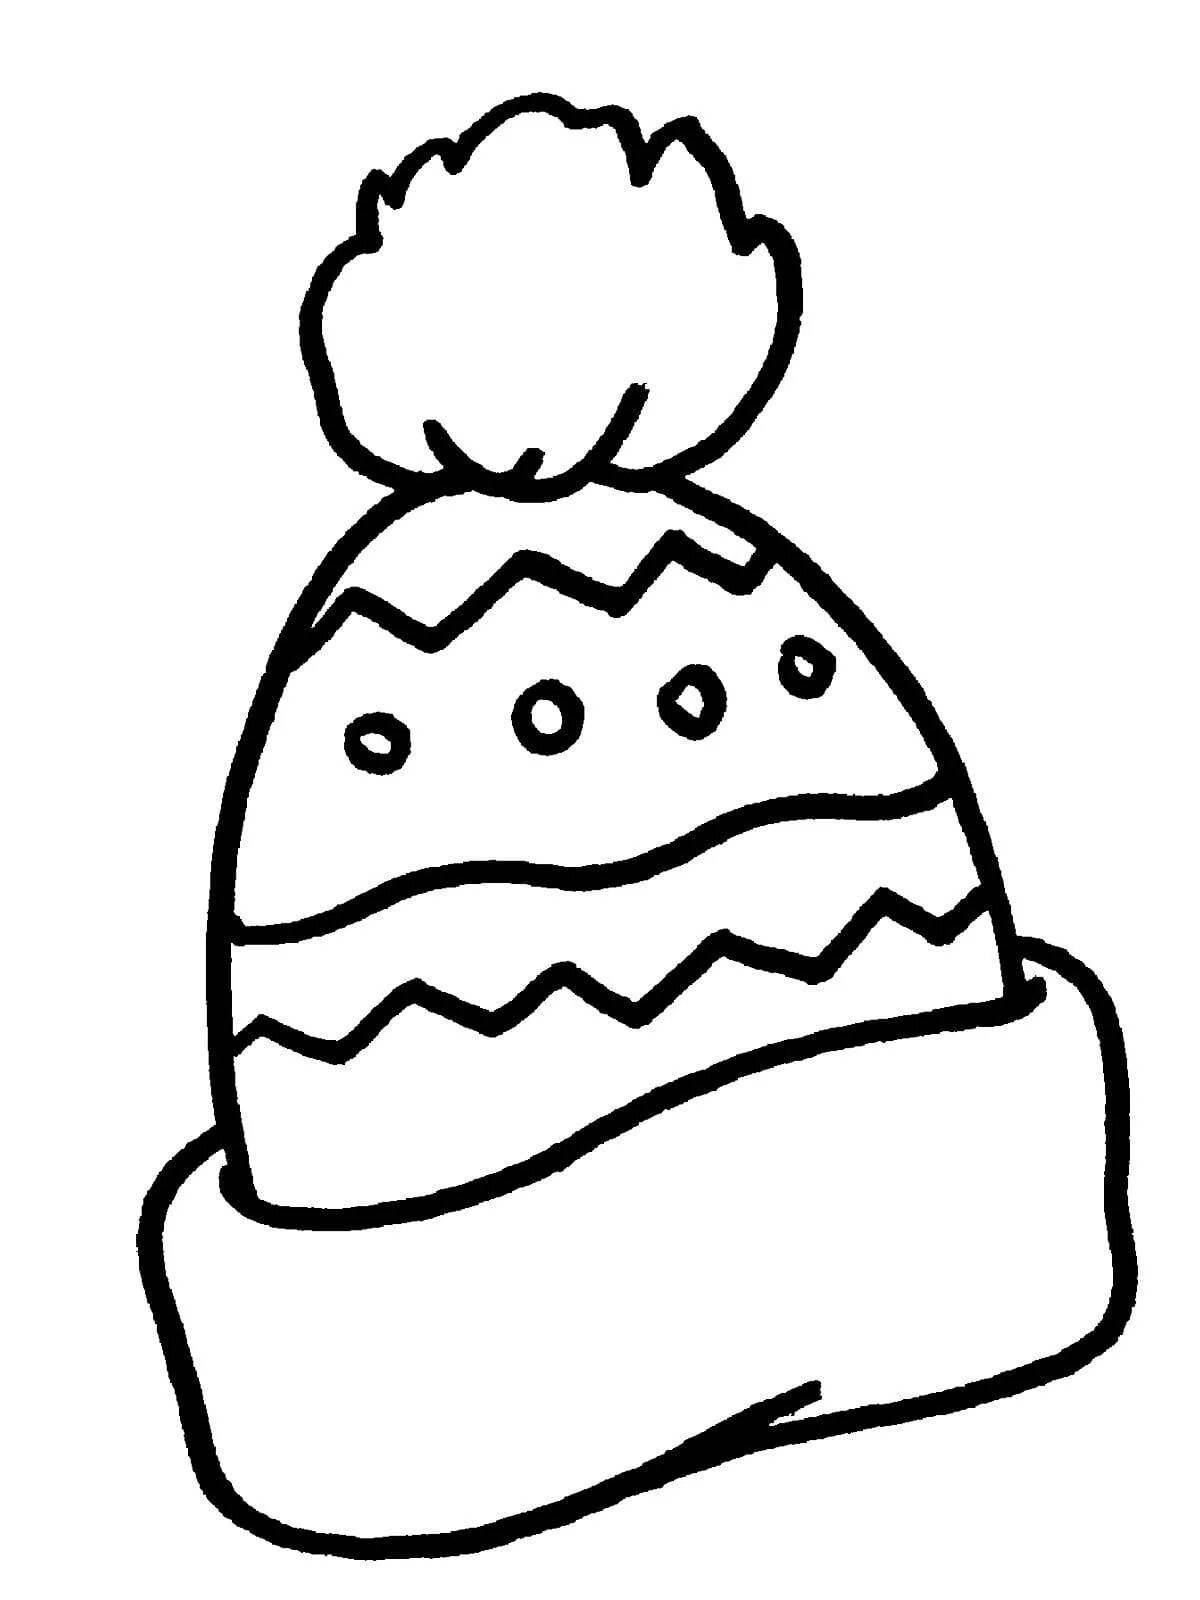 Coloring book shiny winter hat